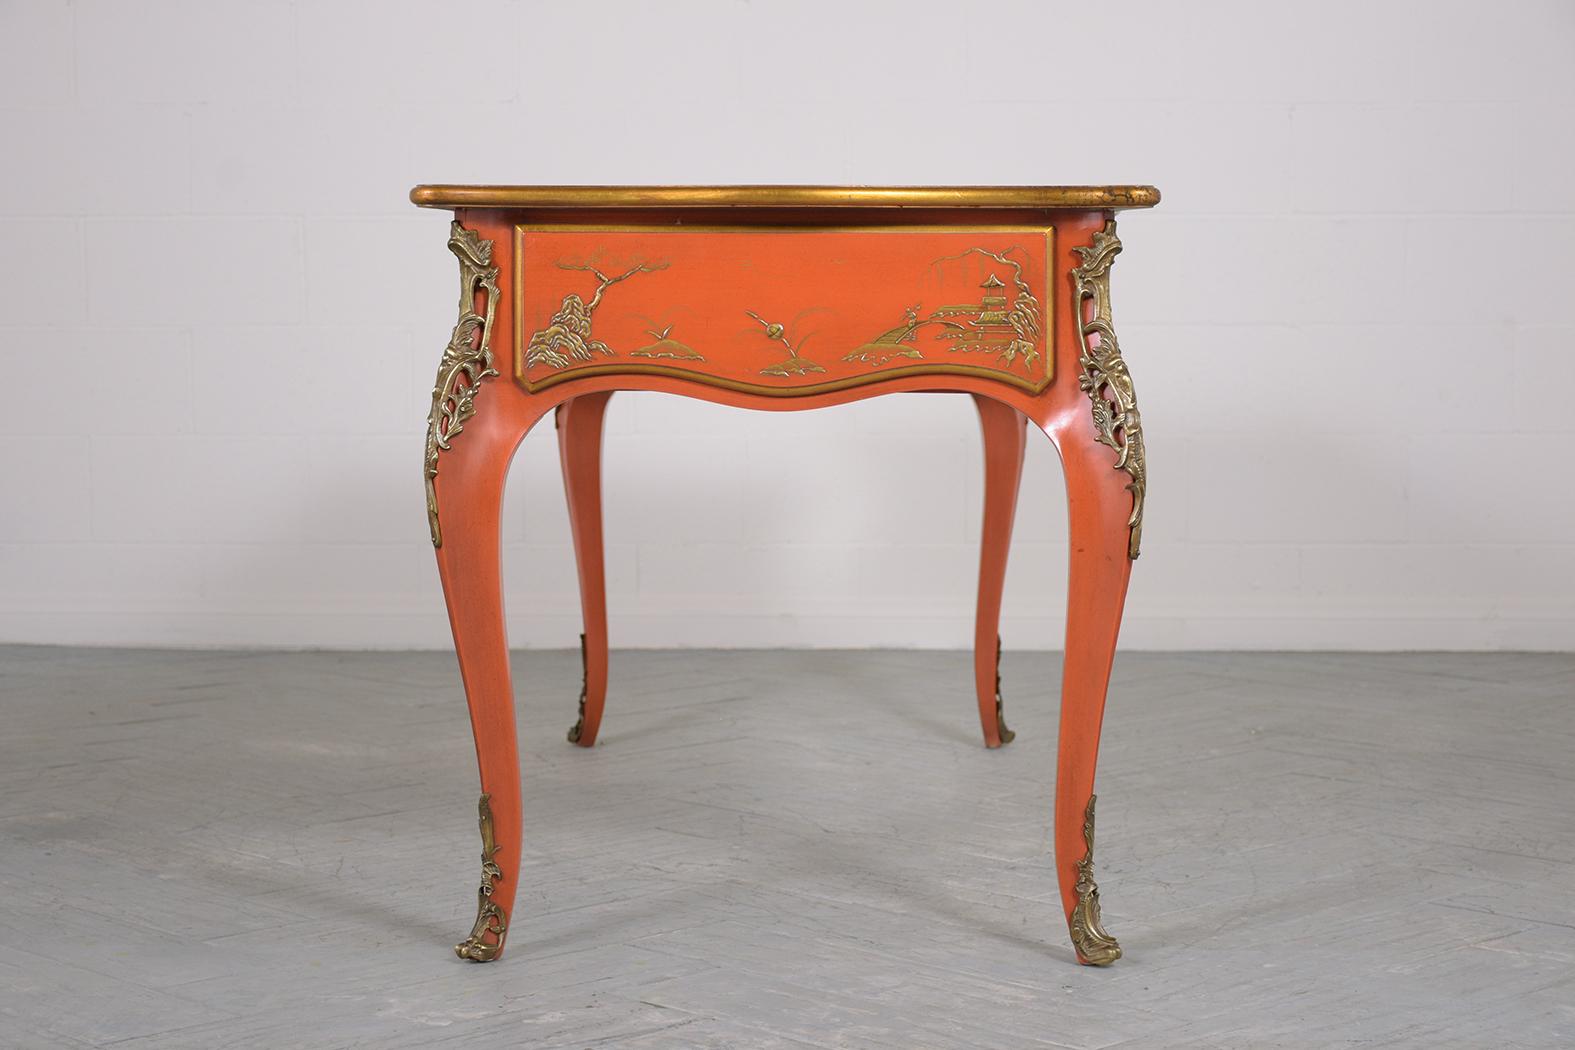 1970s Chinoiserie-Style Walnut Desk with Engraved Leather Top & Brass Accents For Sale 2